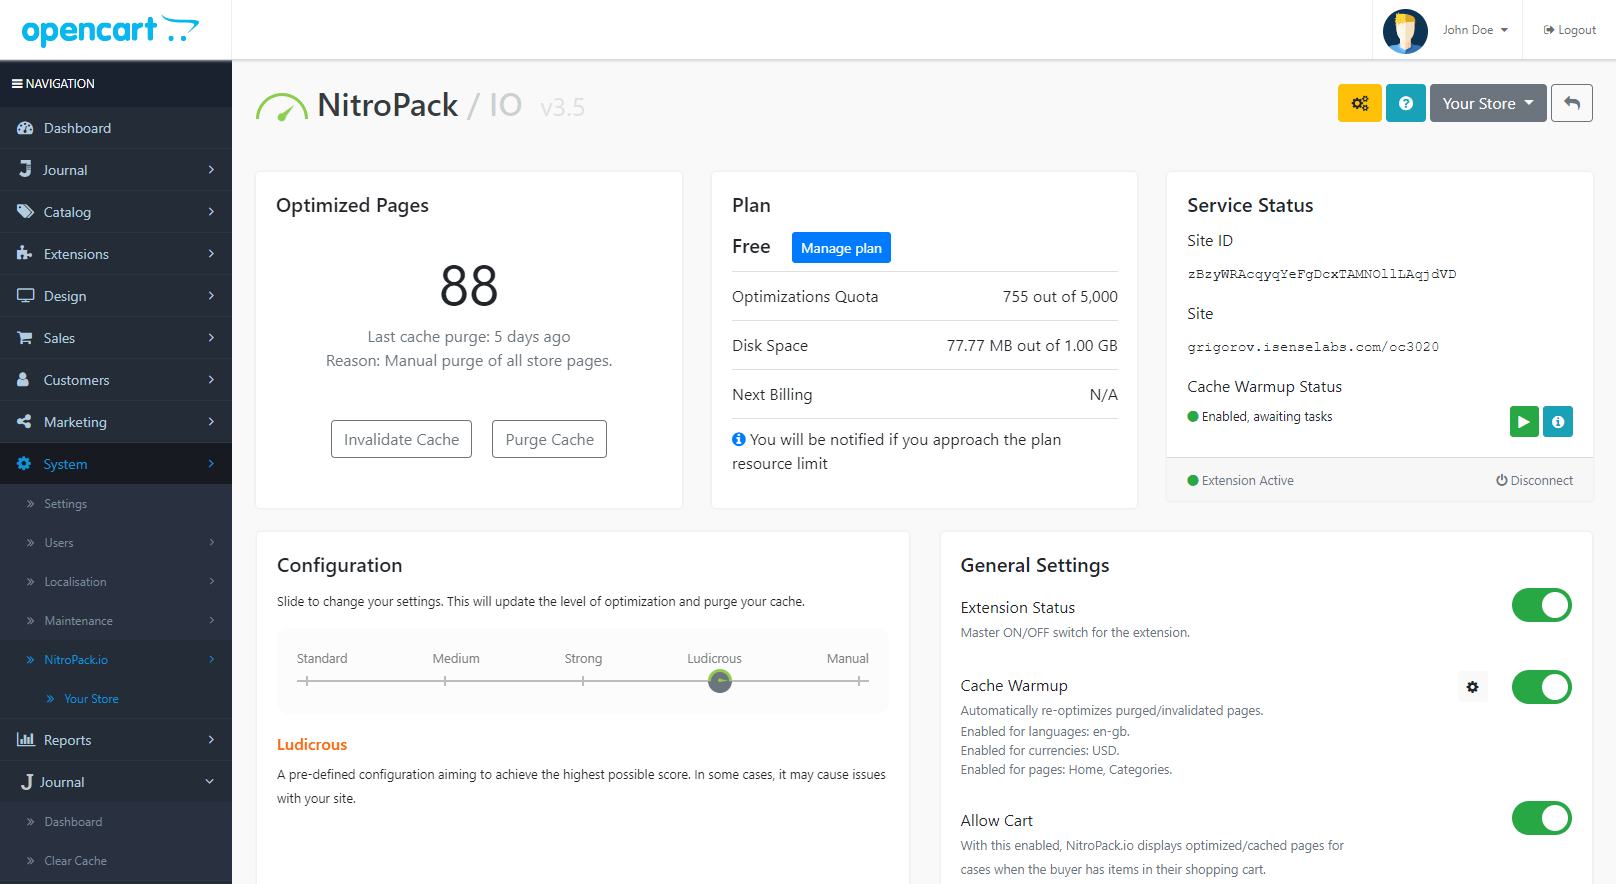 OpenCart | Check out how NitroPack optimizes it